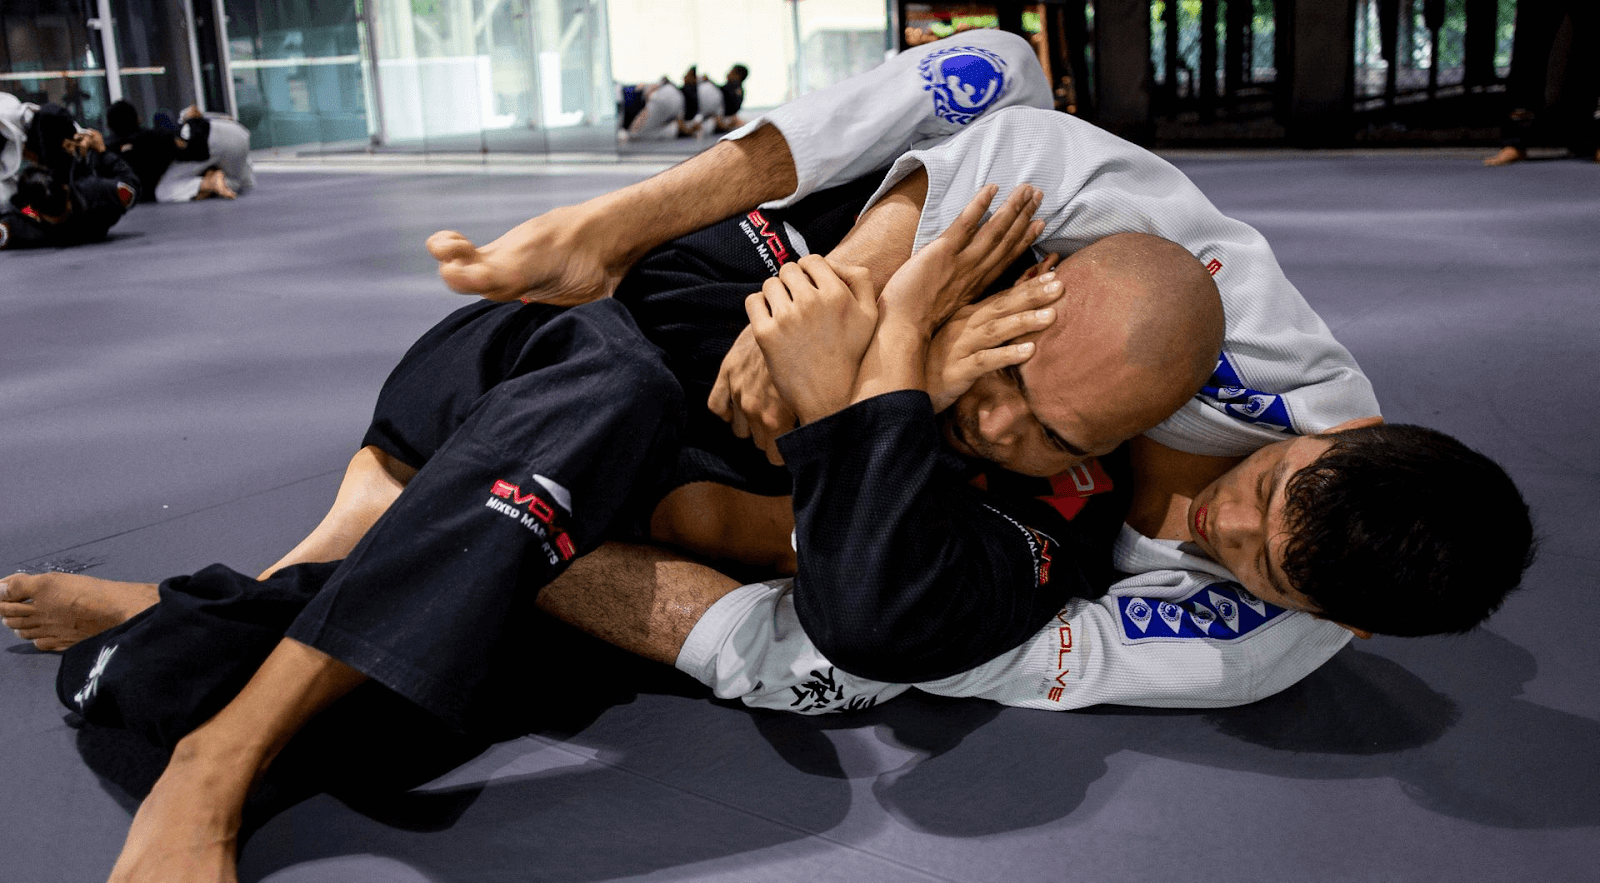 What are the Differences Between Combat Jiujitsu and BJJ?